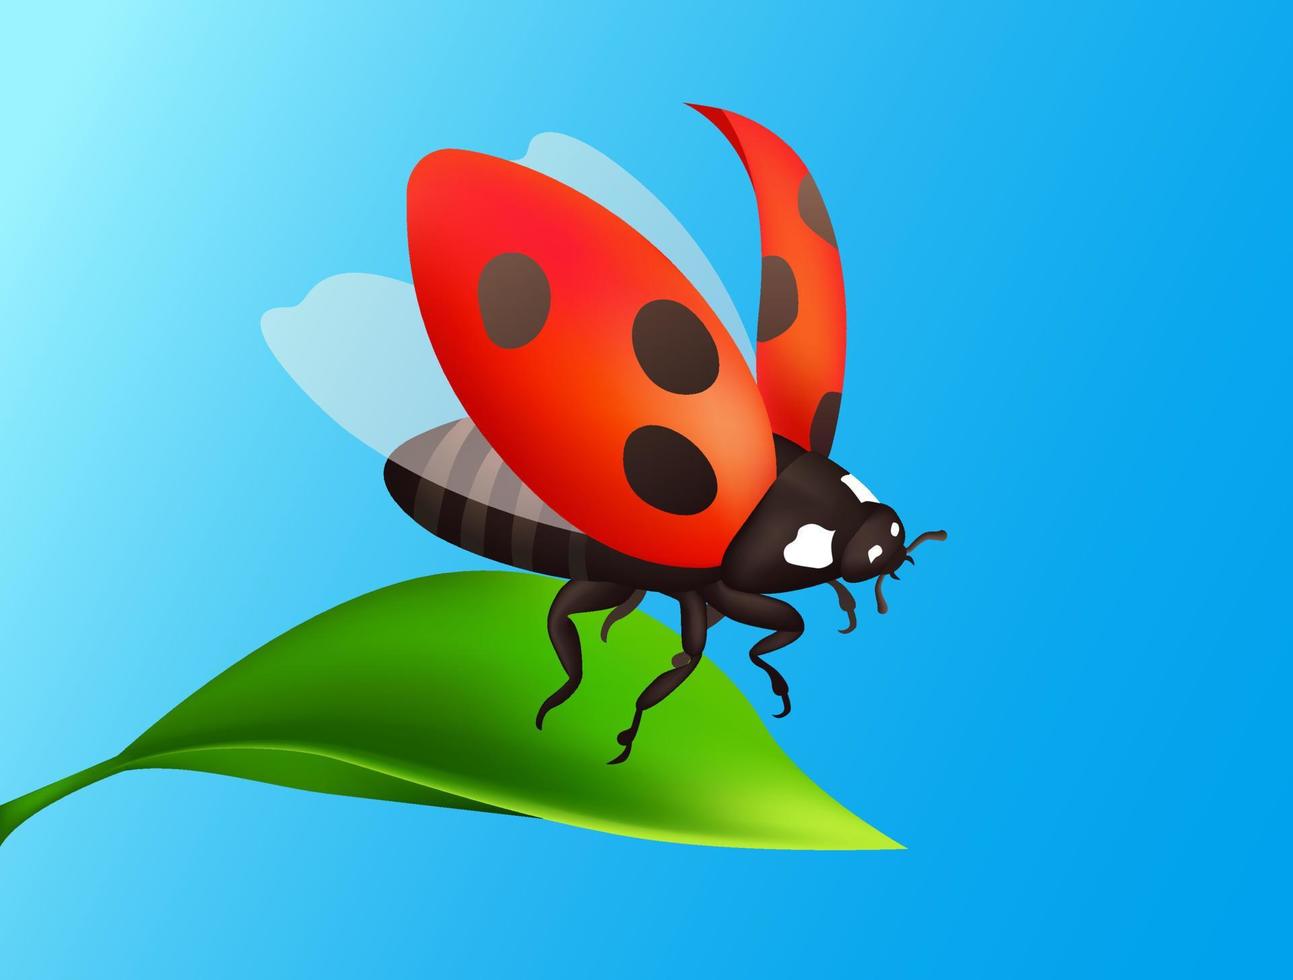 Ladybug, ladybird illustration. Flying ladybird. Nature realistic macro illustration, design for biology book. Red Insect flying from the green leaf. Blue sky background. vector